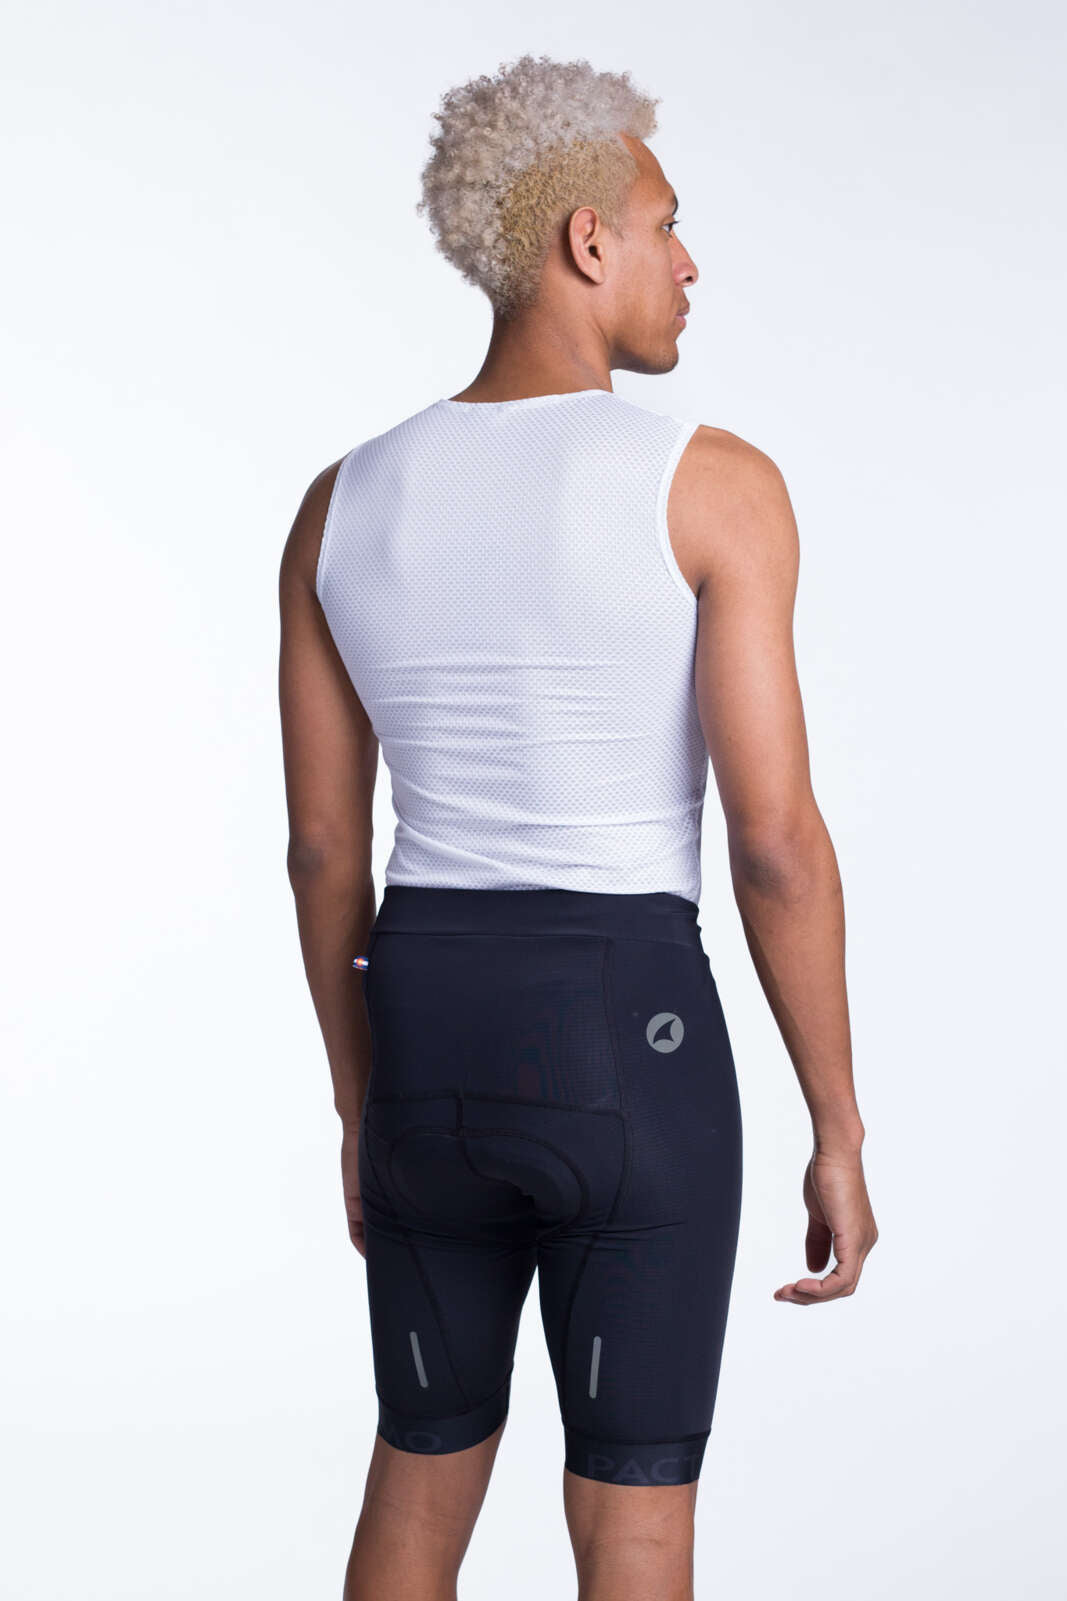 Men's Cycling Shorts - Ascent Vector Back View